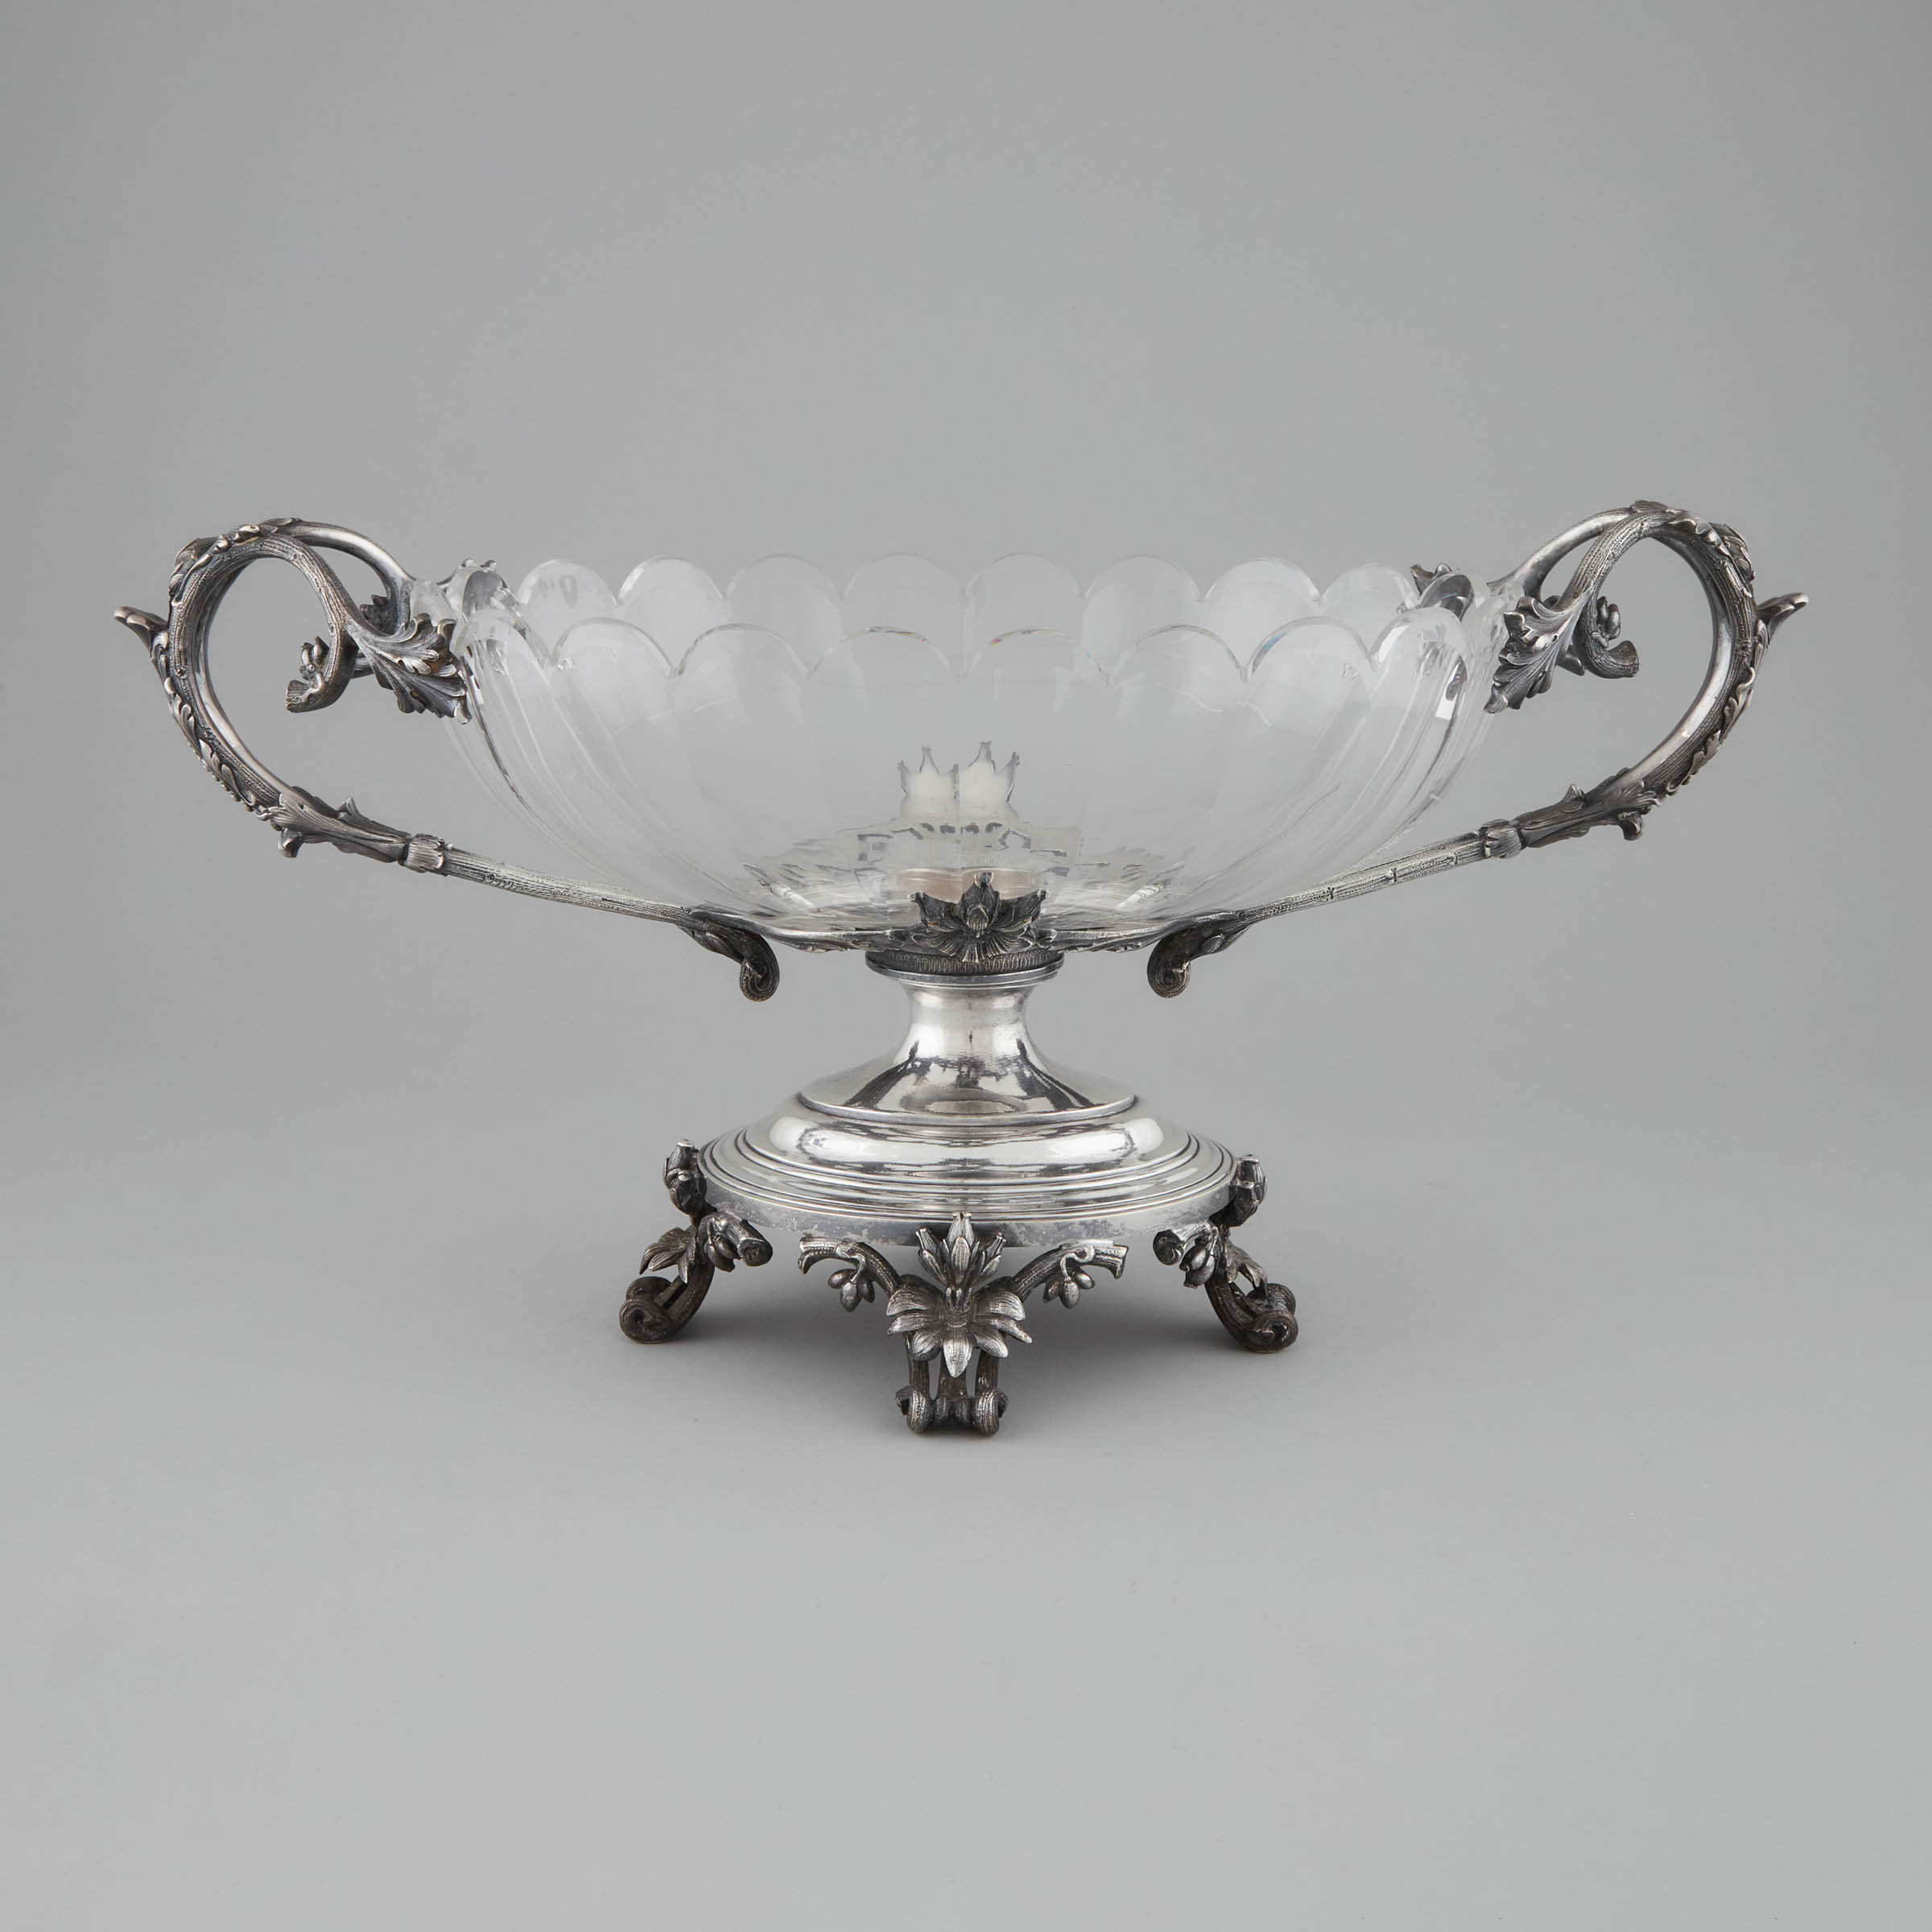 Large Continental Silver Plated and Cut Glass Oval Centrepiece Bowl, late 19th century